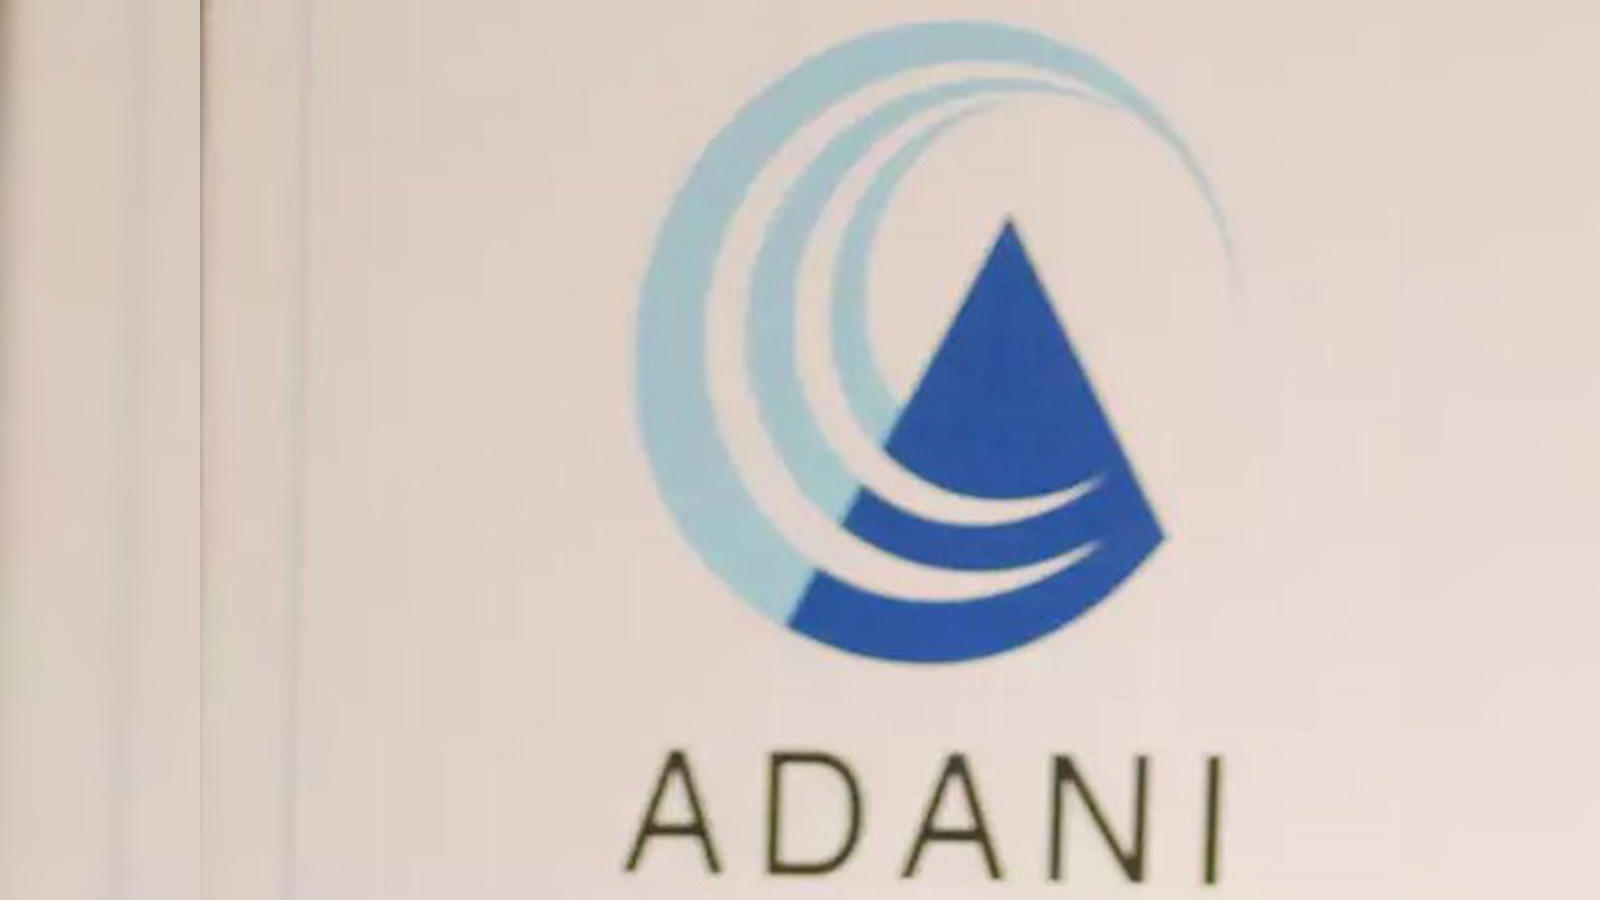 Gautam Adani outlines why he bought Ambuja Cements, ACC and group's future  plans | Mint